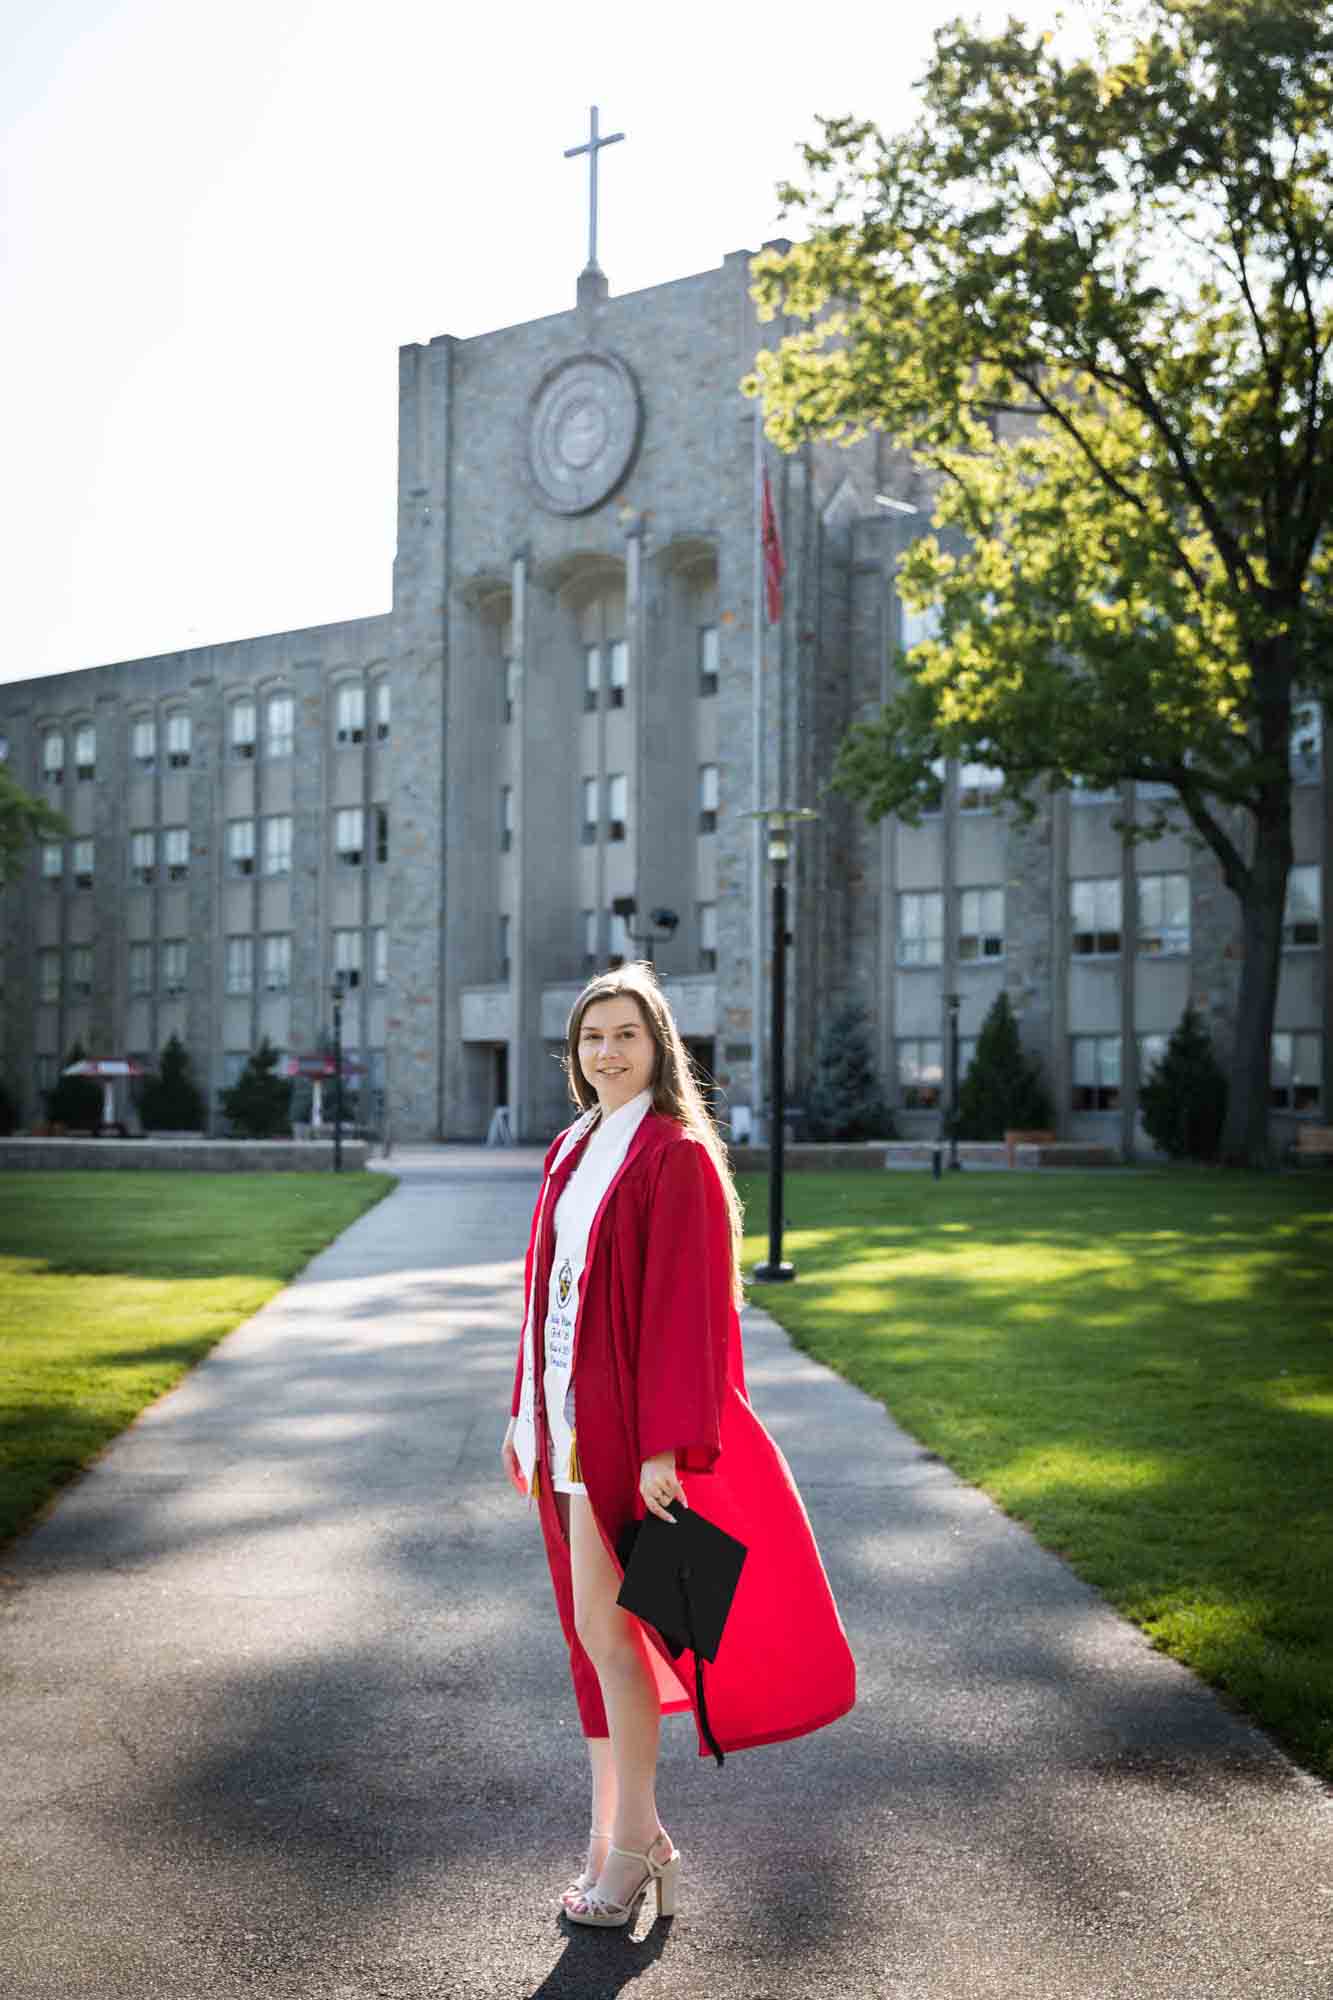 Female graduate wearing red robe and white sash holding cap during a St. John’s University graduate portrait session